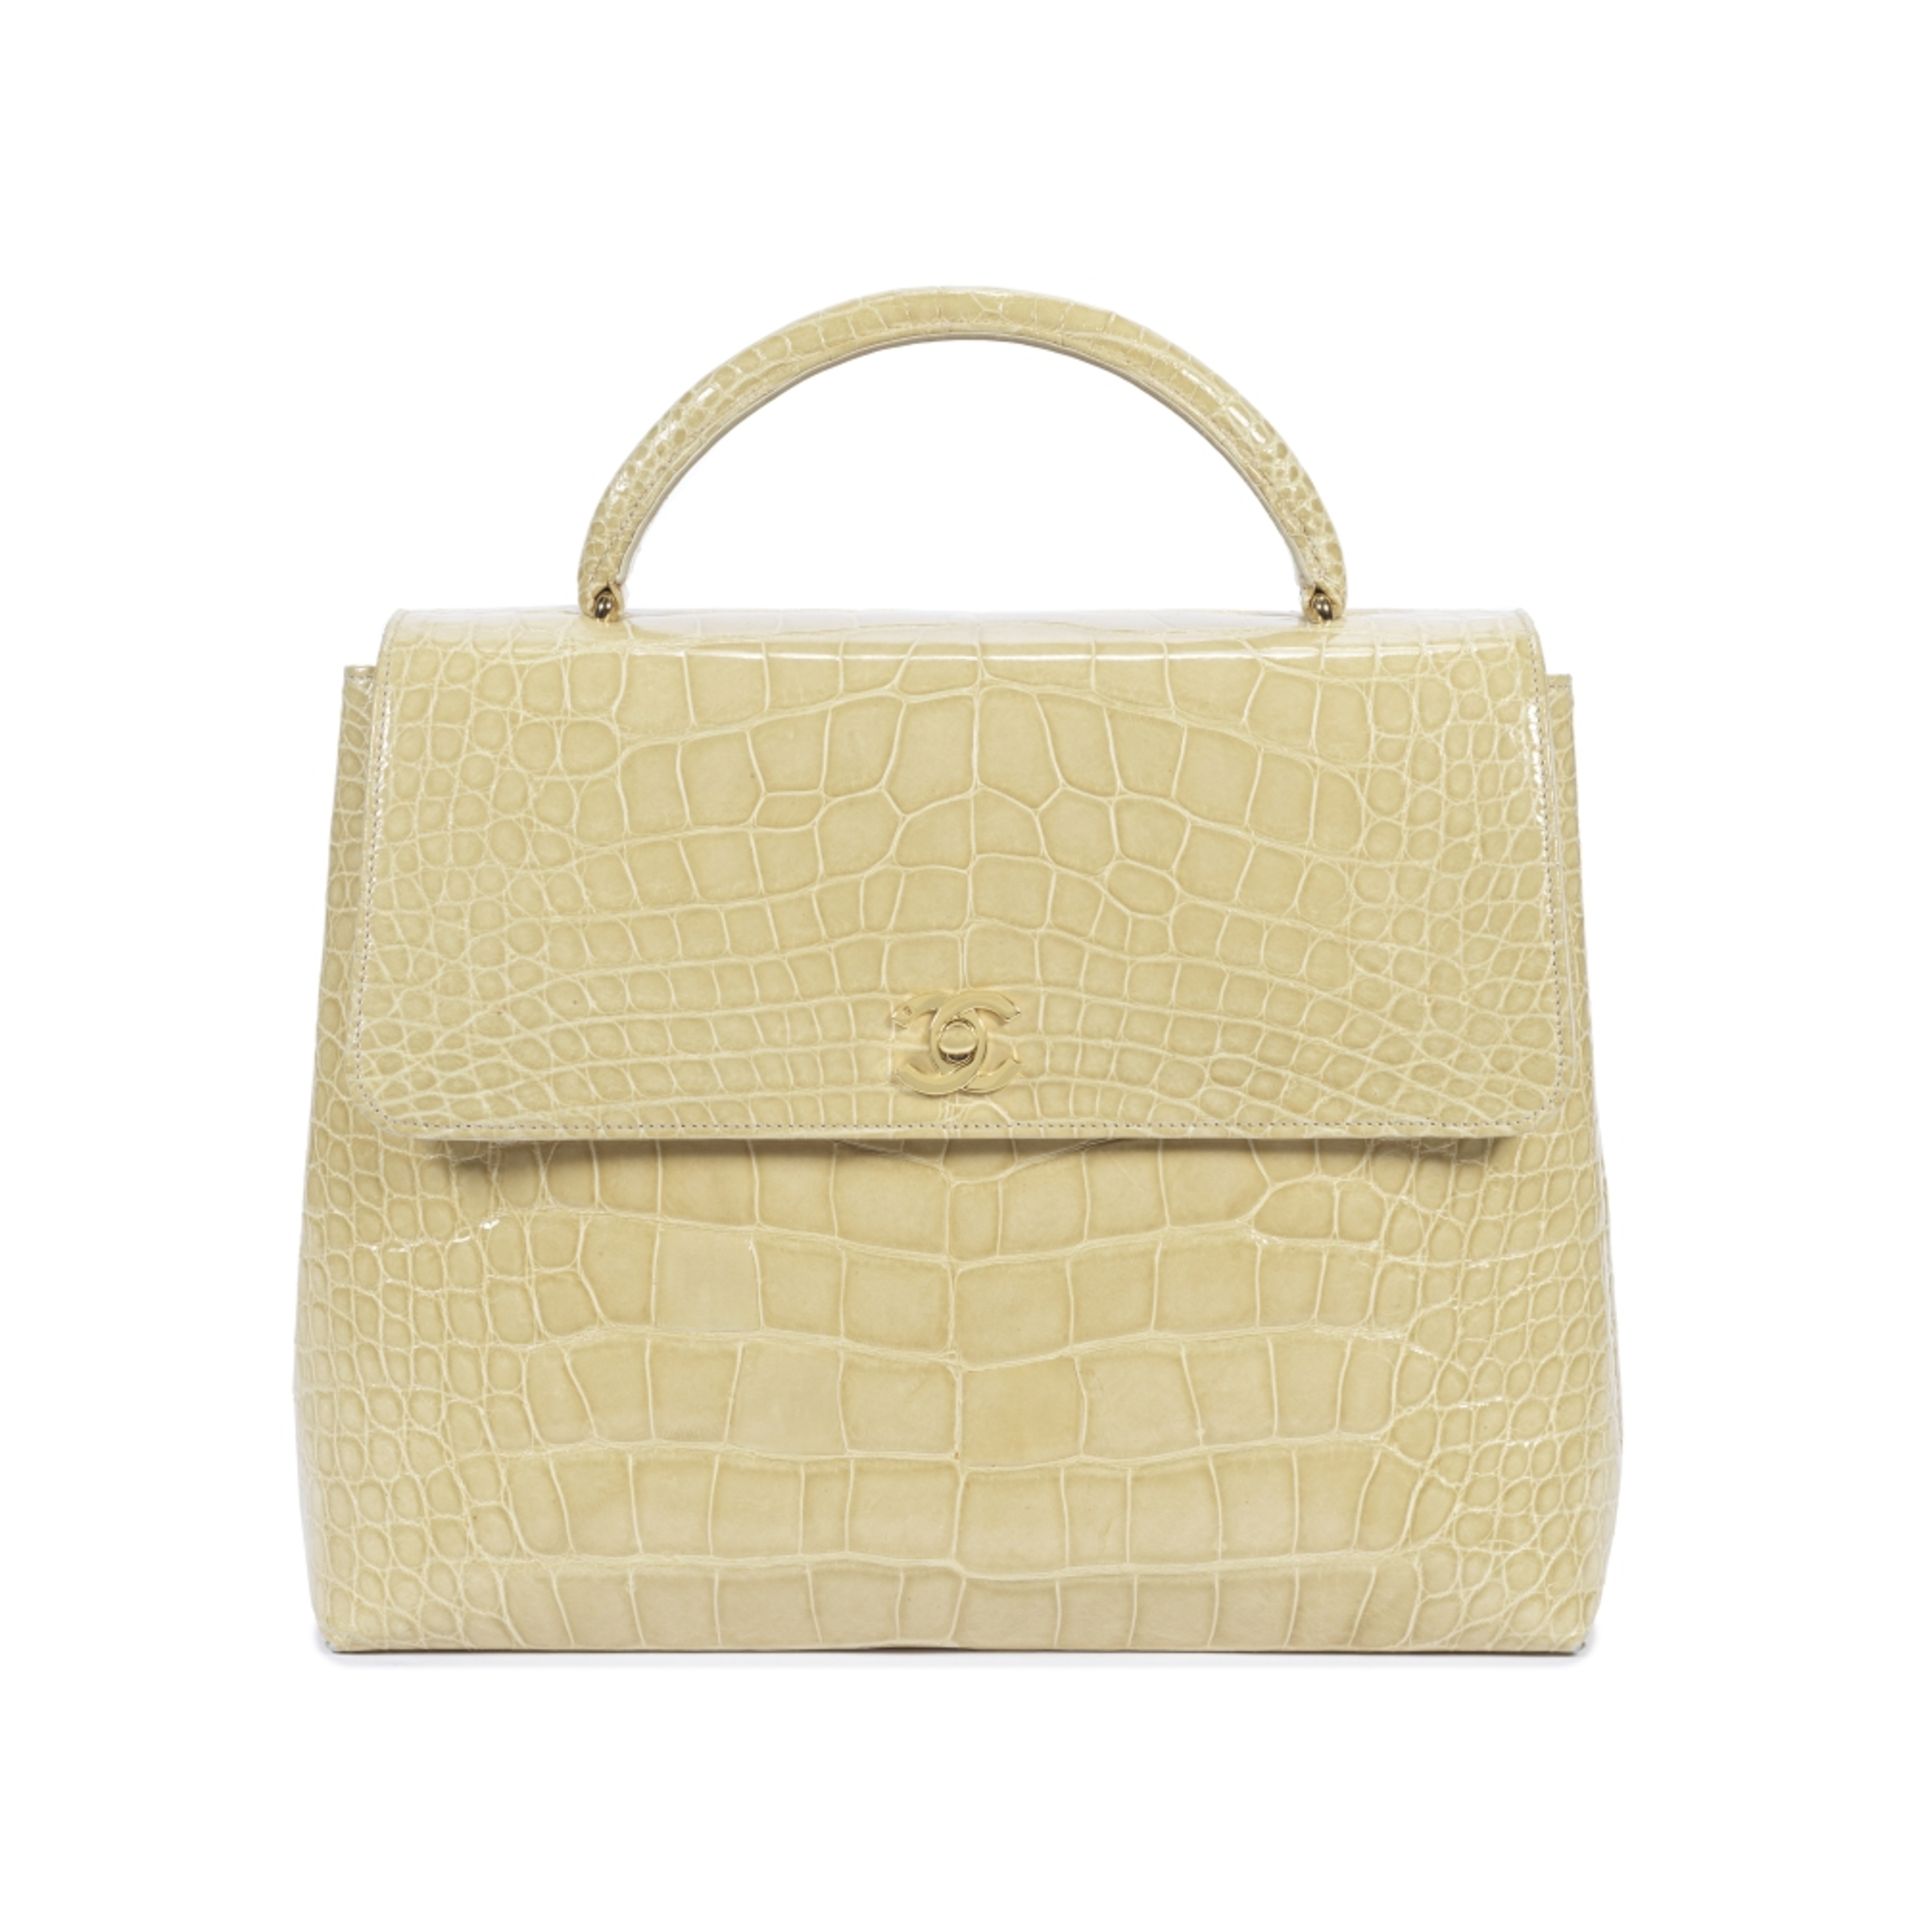 Chanel: a Beige Clair Alligator Large Kelly Handbag Autumn 2003 (includes serial sticker, authent...